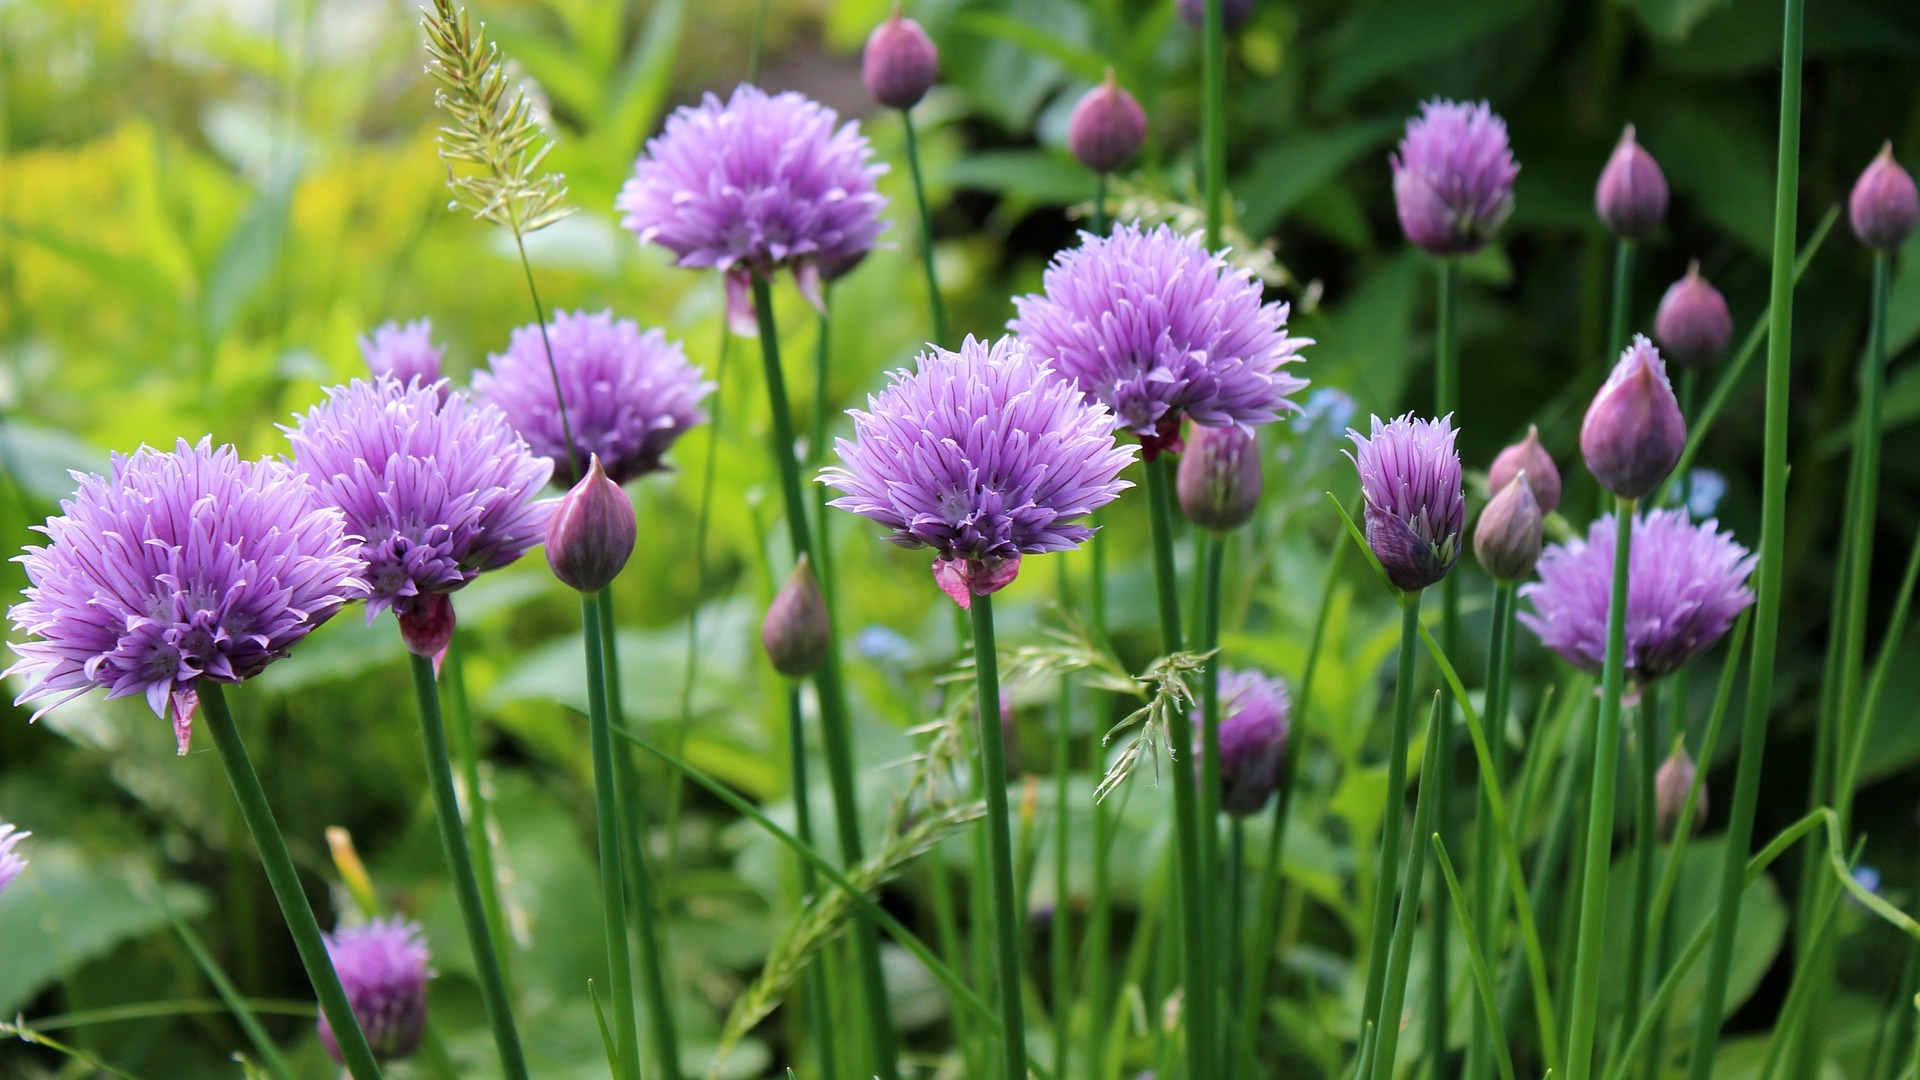 Chives: Planting, Growing, and Harvesting Chives | The Old Farmer's ...